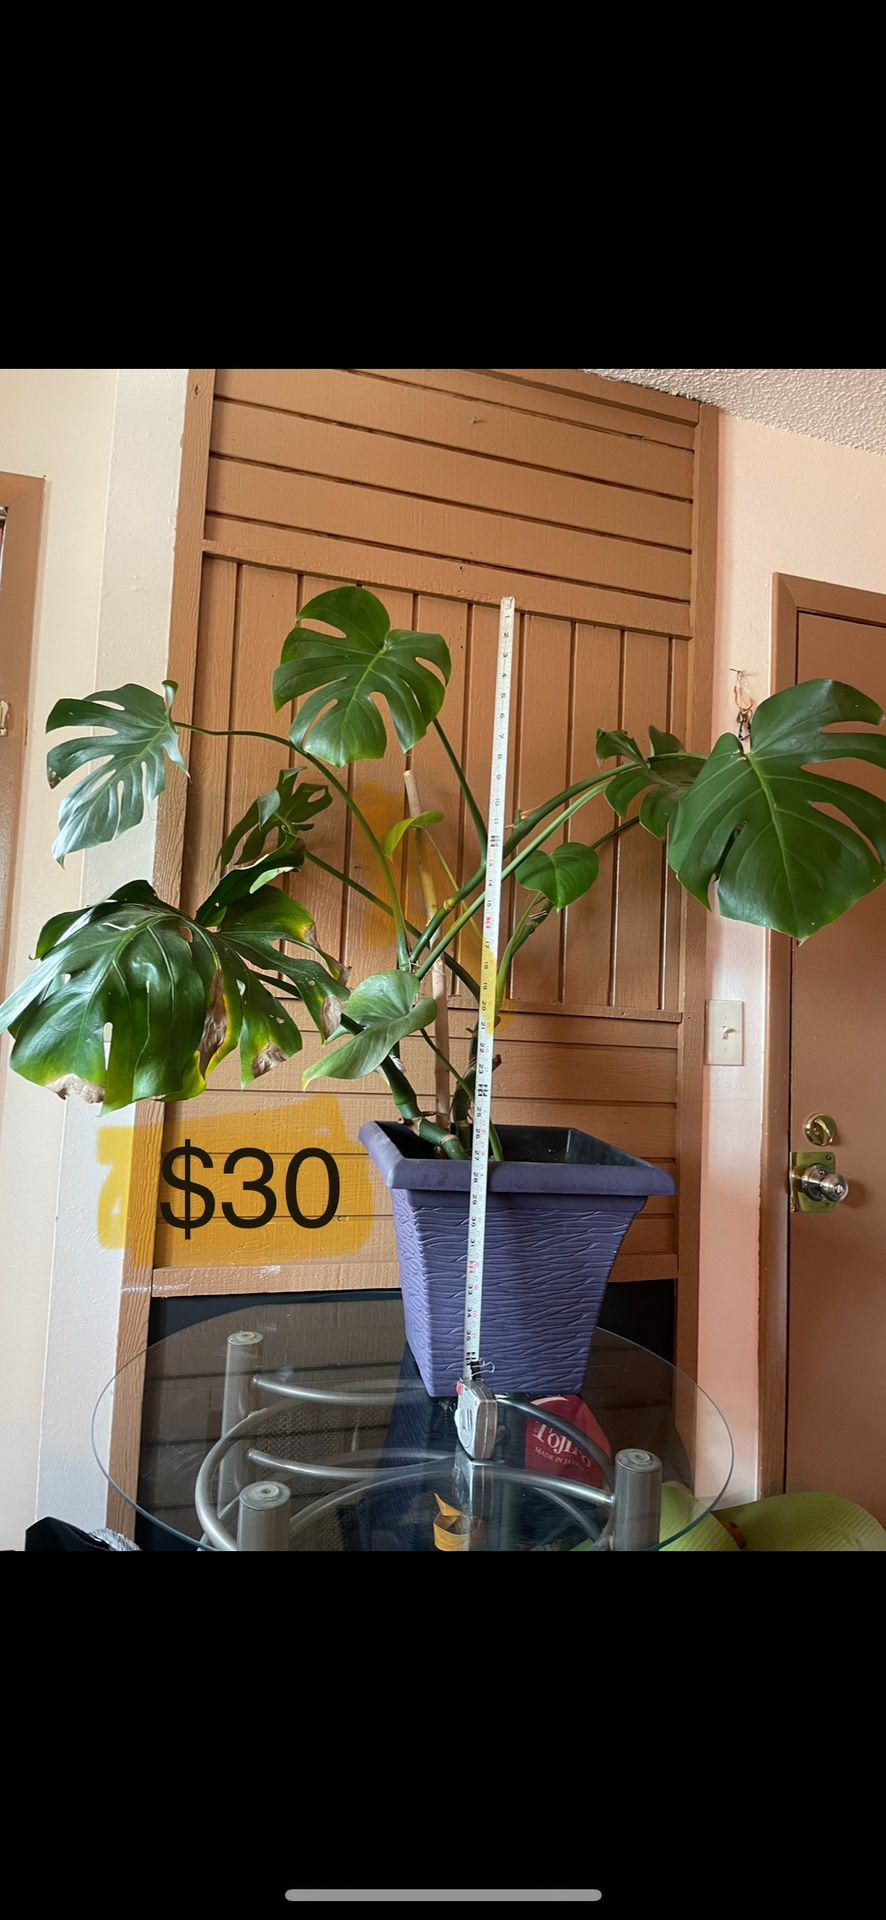 Giant, healthy Monstera plant